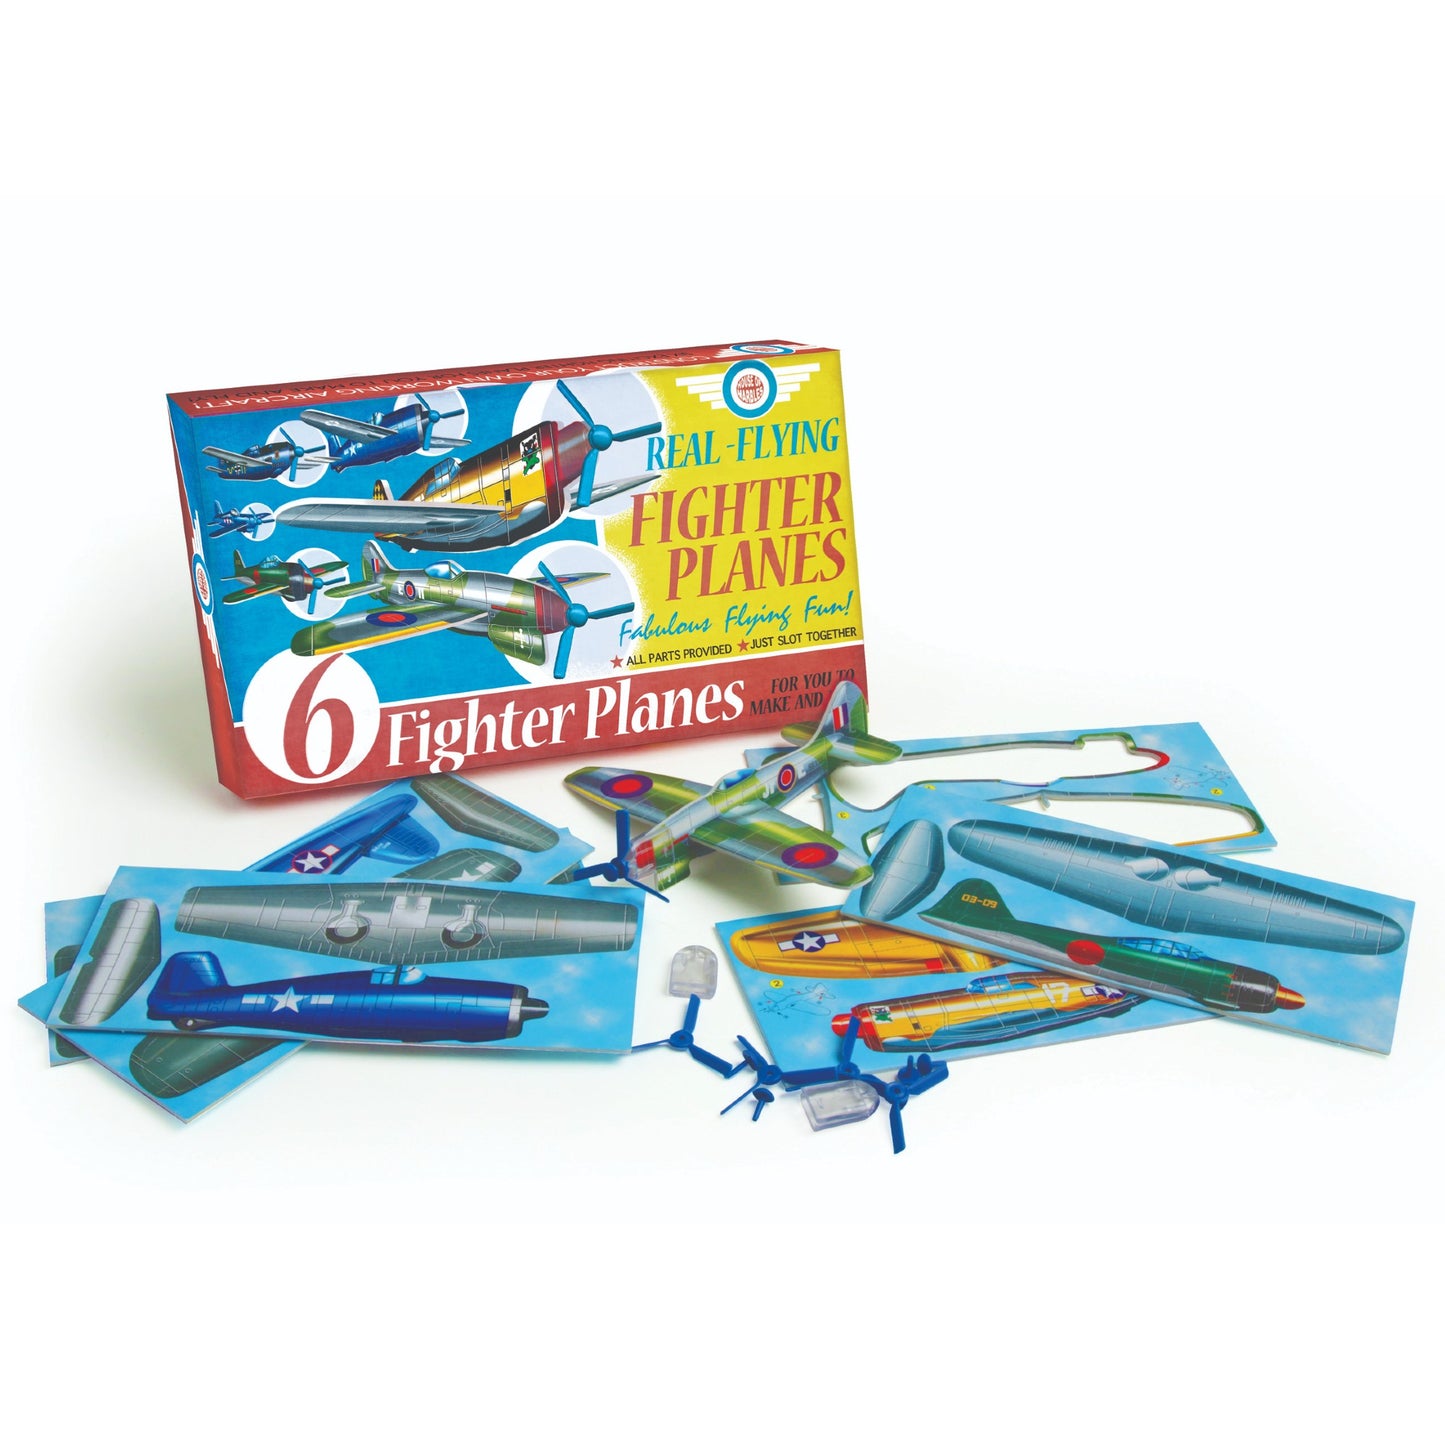 Fighter Planes Kit of 6 Planes